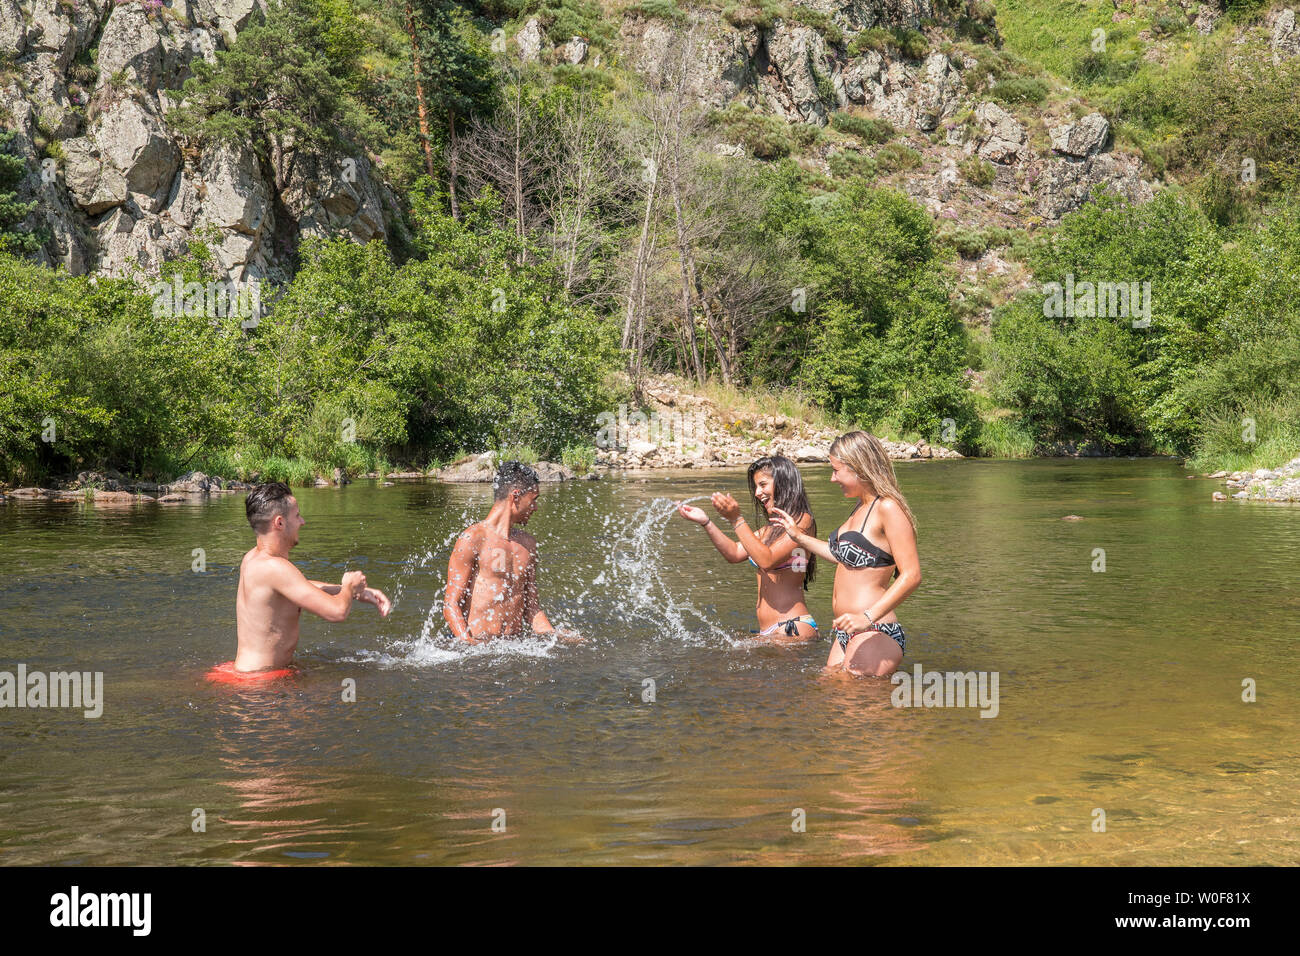 Auvergne - Rhone-Alpes - Haute-Loire - Bathing in the Loire at Arlemdes under the basalt cliffs. Four friends, two boys and two girls, are splattering each other in the river. Stock Photo